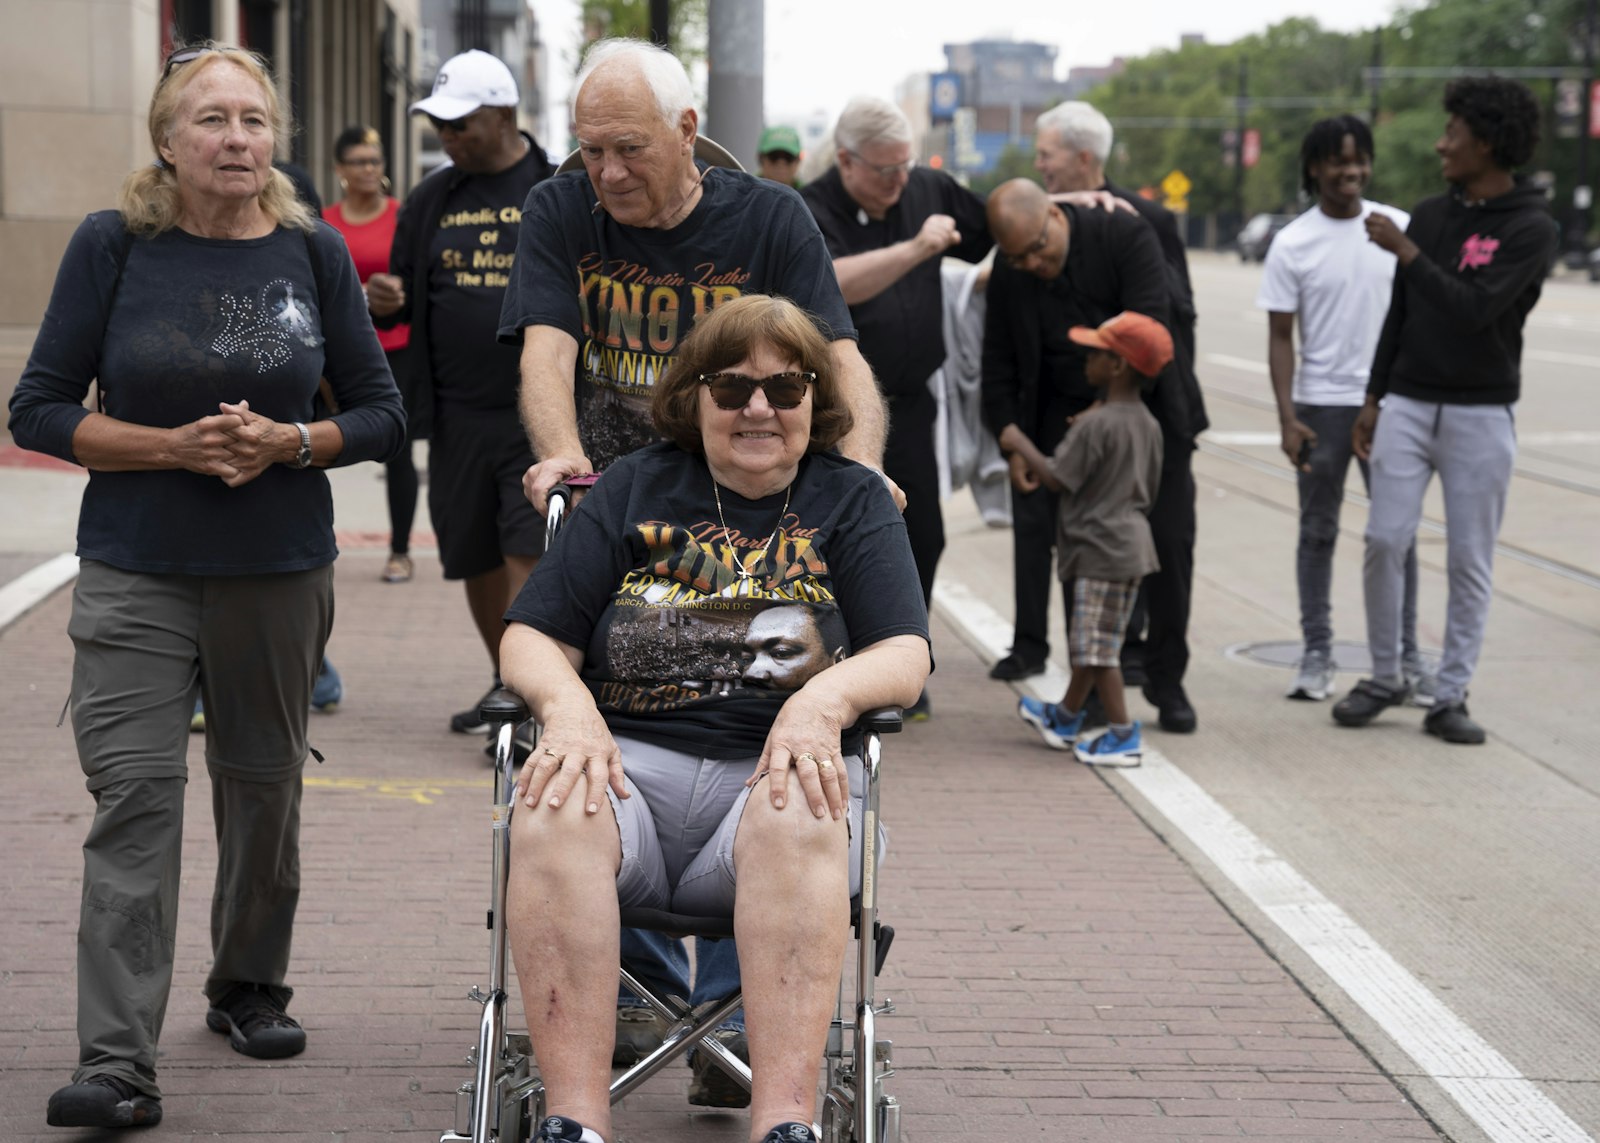 In 1963, Marge Sears was a high school student from the Metro Detroit suburb of Livonia. Sears attended the march in a wheelchair pushed by her husband. She said that she currently has trouble with her legs, but she wouldn’t let that stop her from being present.